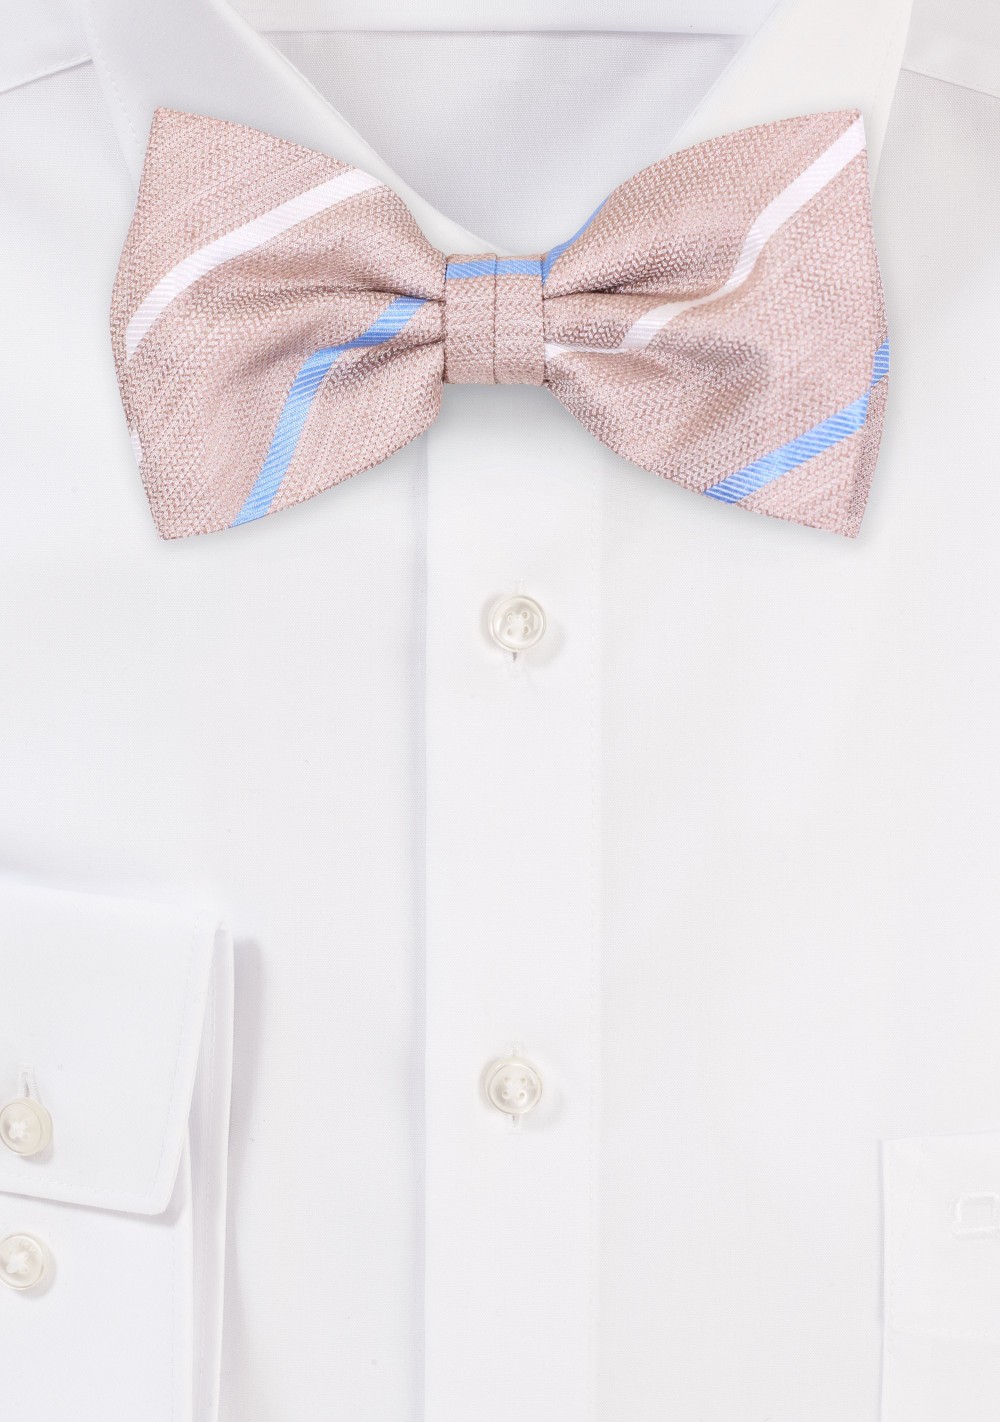 Wheat Colored Bow Tie with Blue Stripes